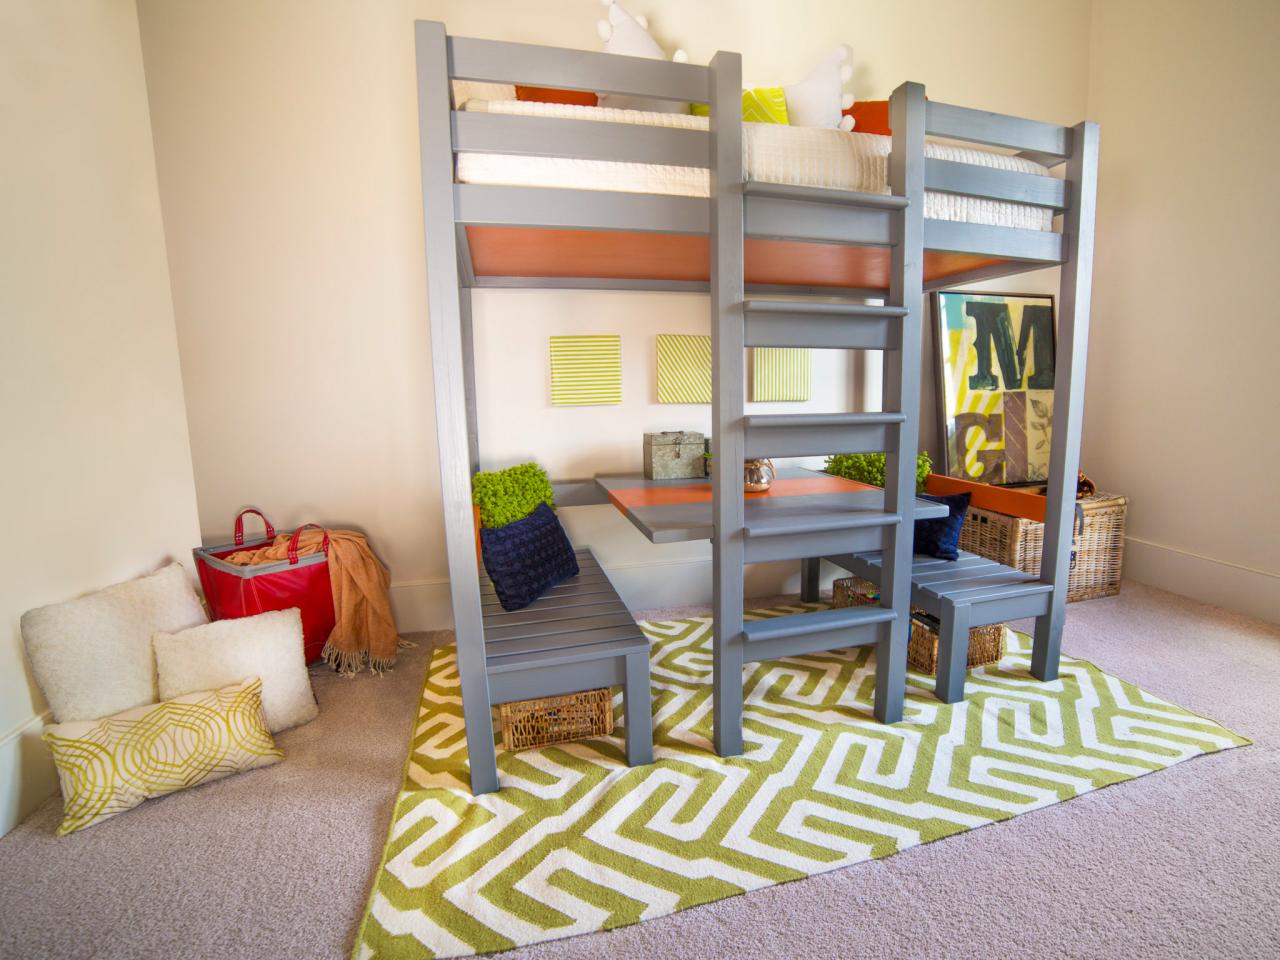 How To Build A Loft Bed With Built In, Loft Bed With Storage Underneath Plans